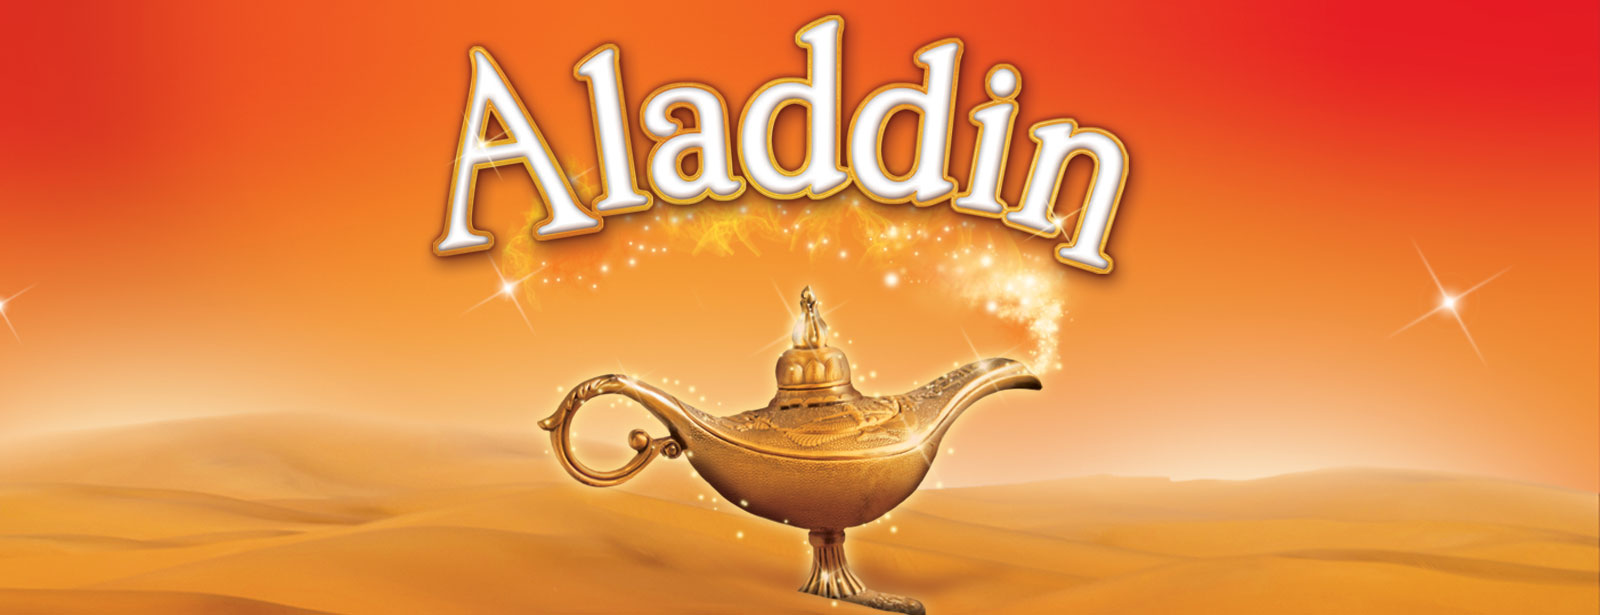 Aladdin — performance for the whole family - Coming Soon in UAE